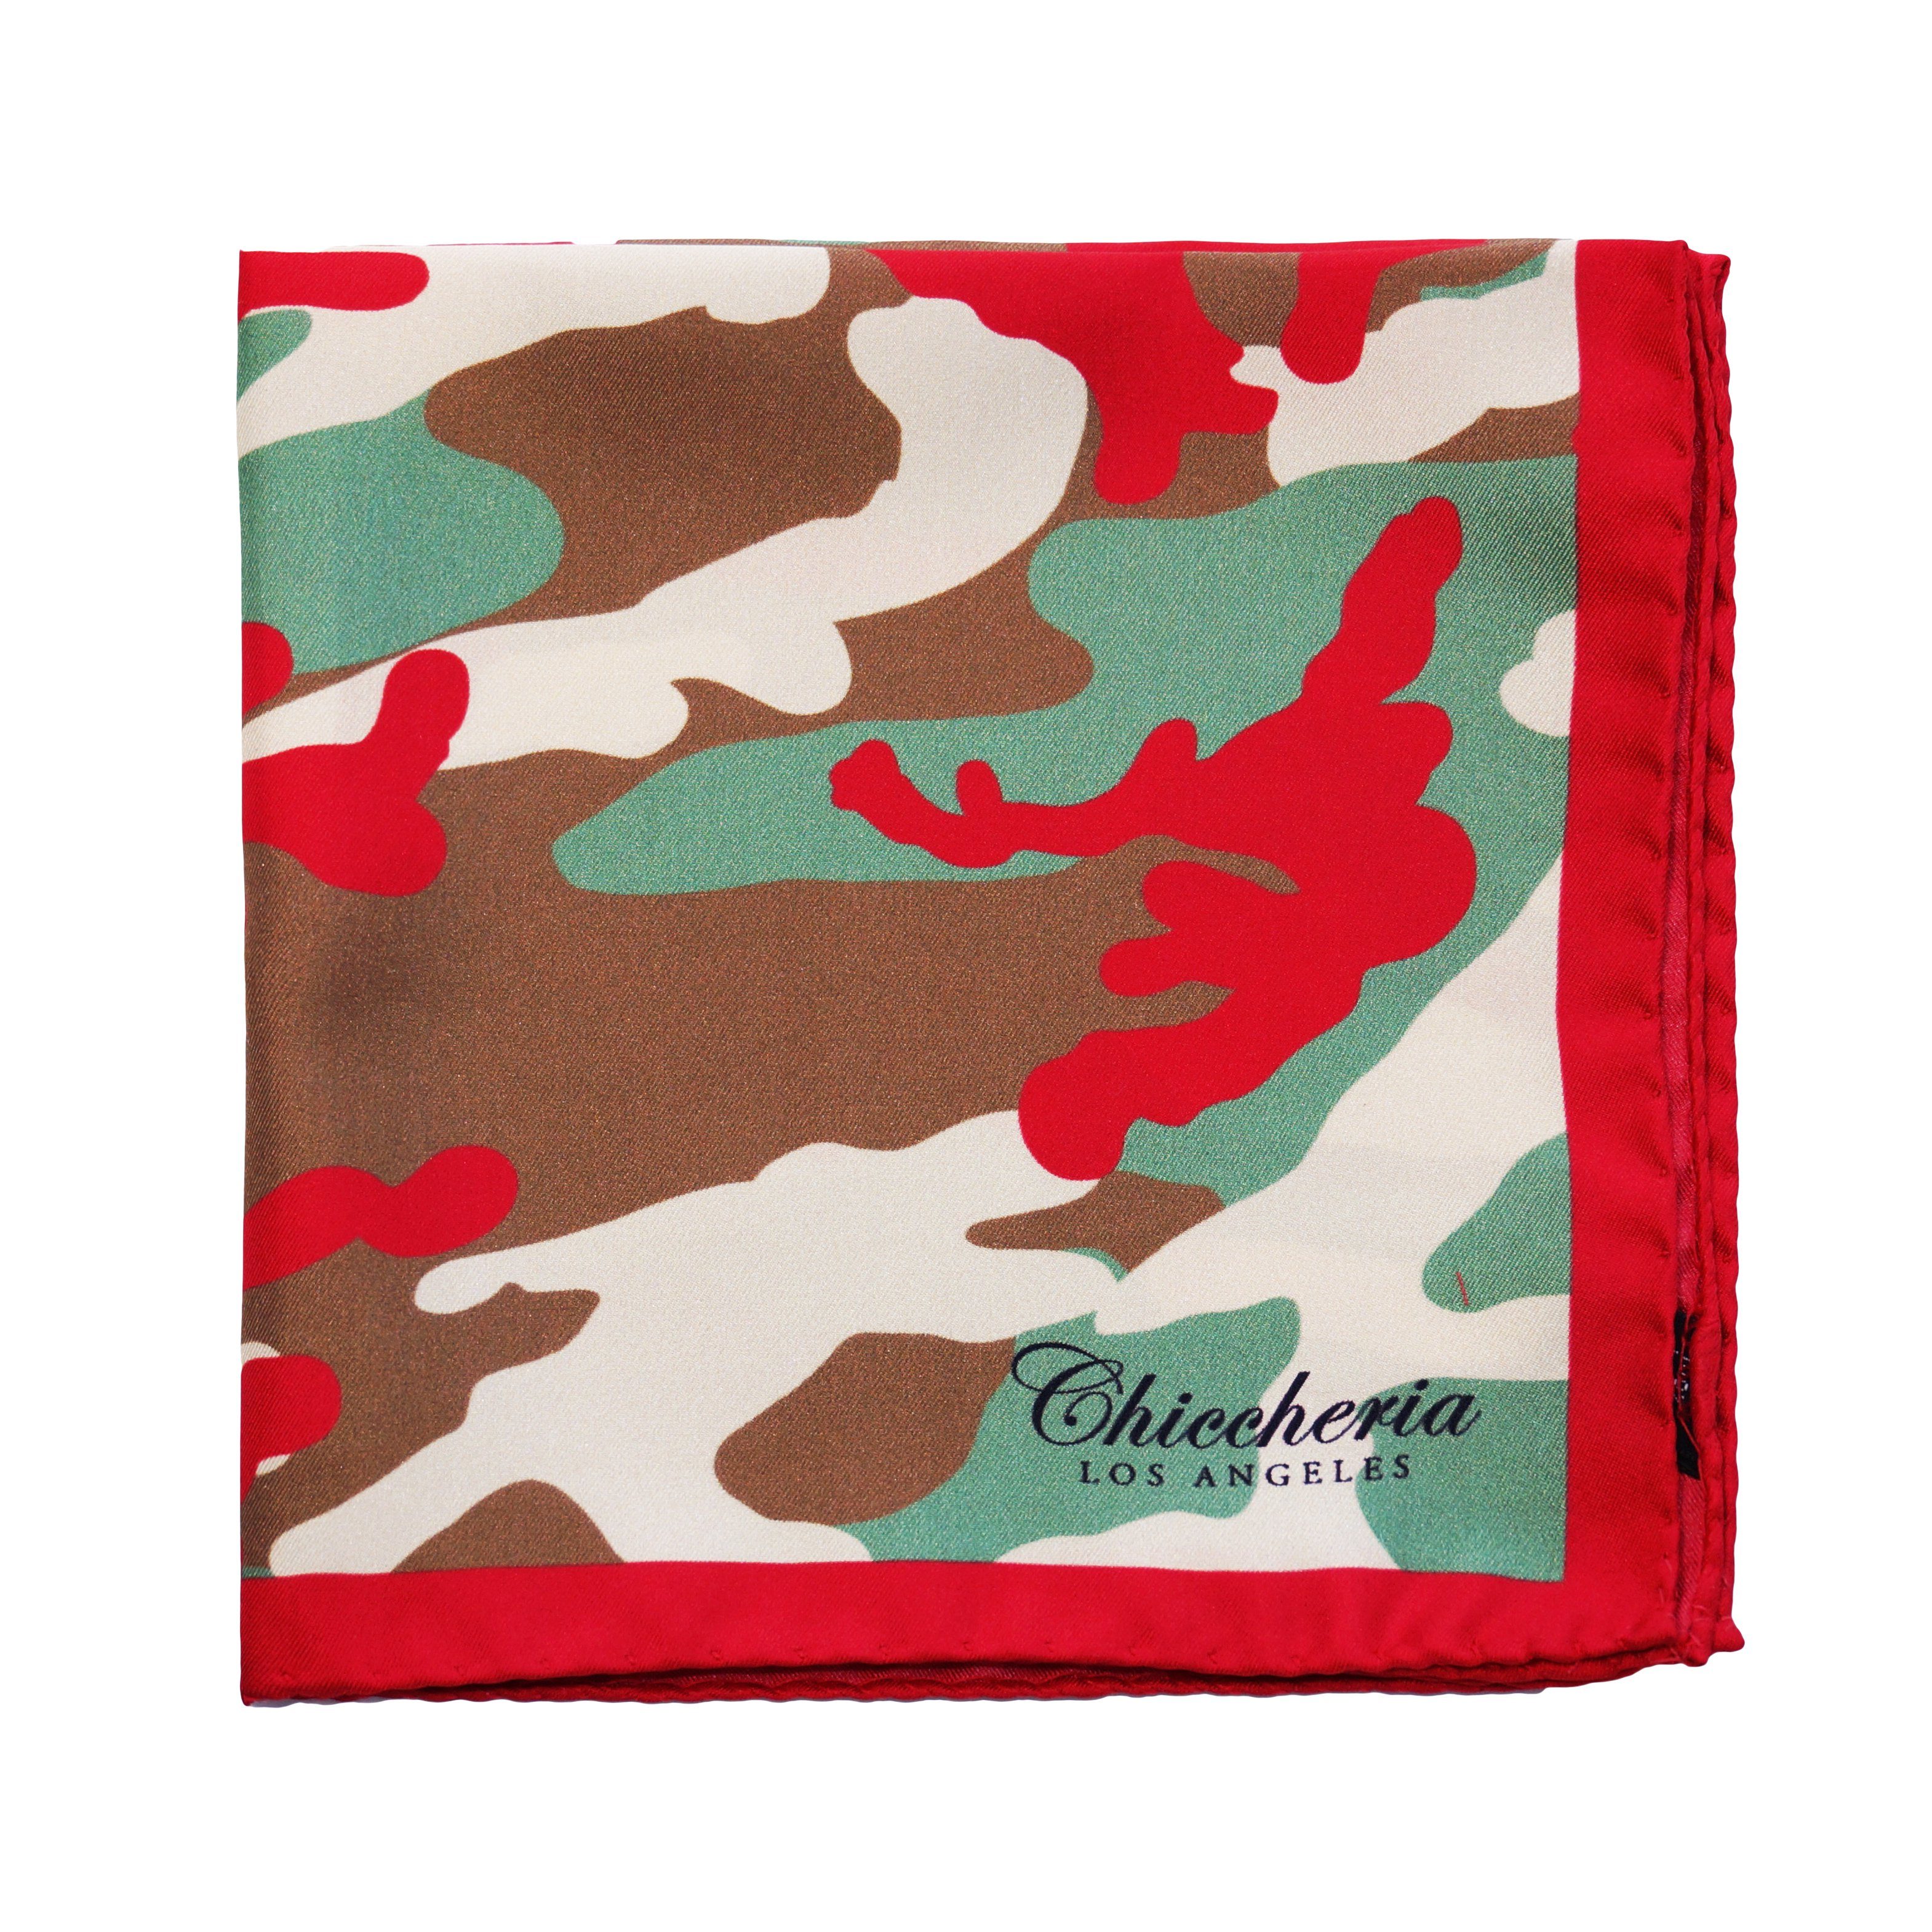 Chiccheria Brand Einstecktuch CAMO, Made in Camouflage, 100% Seide Rot Italy